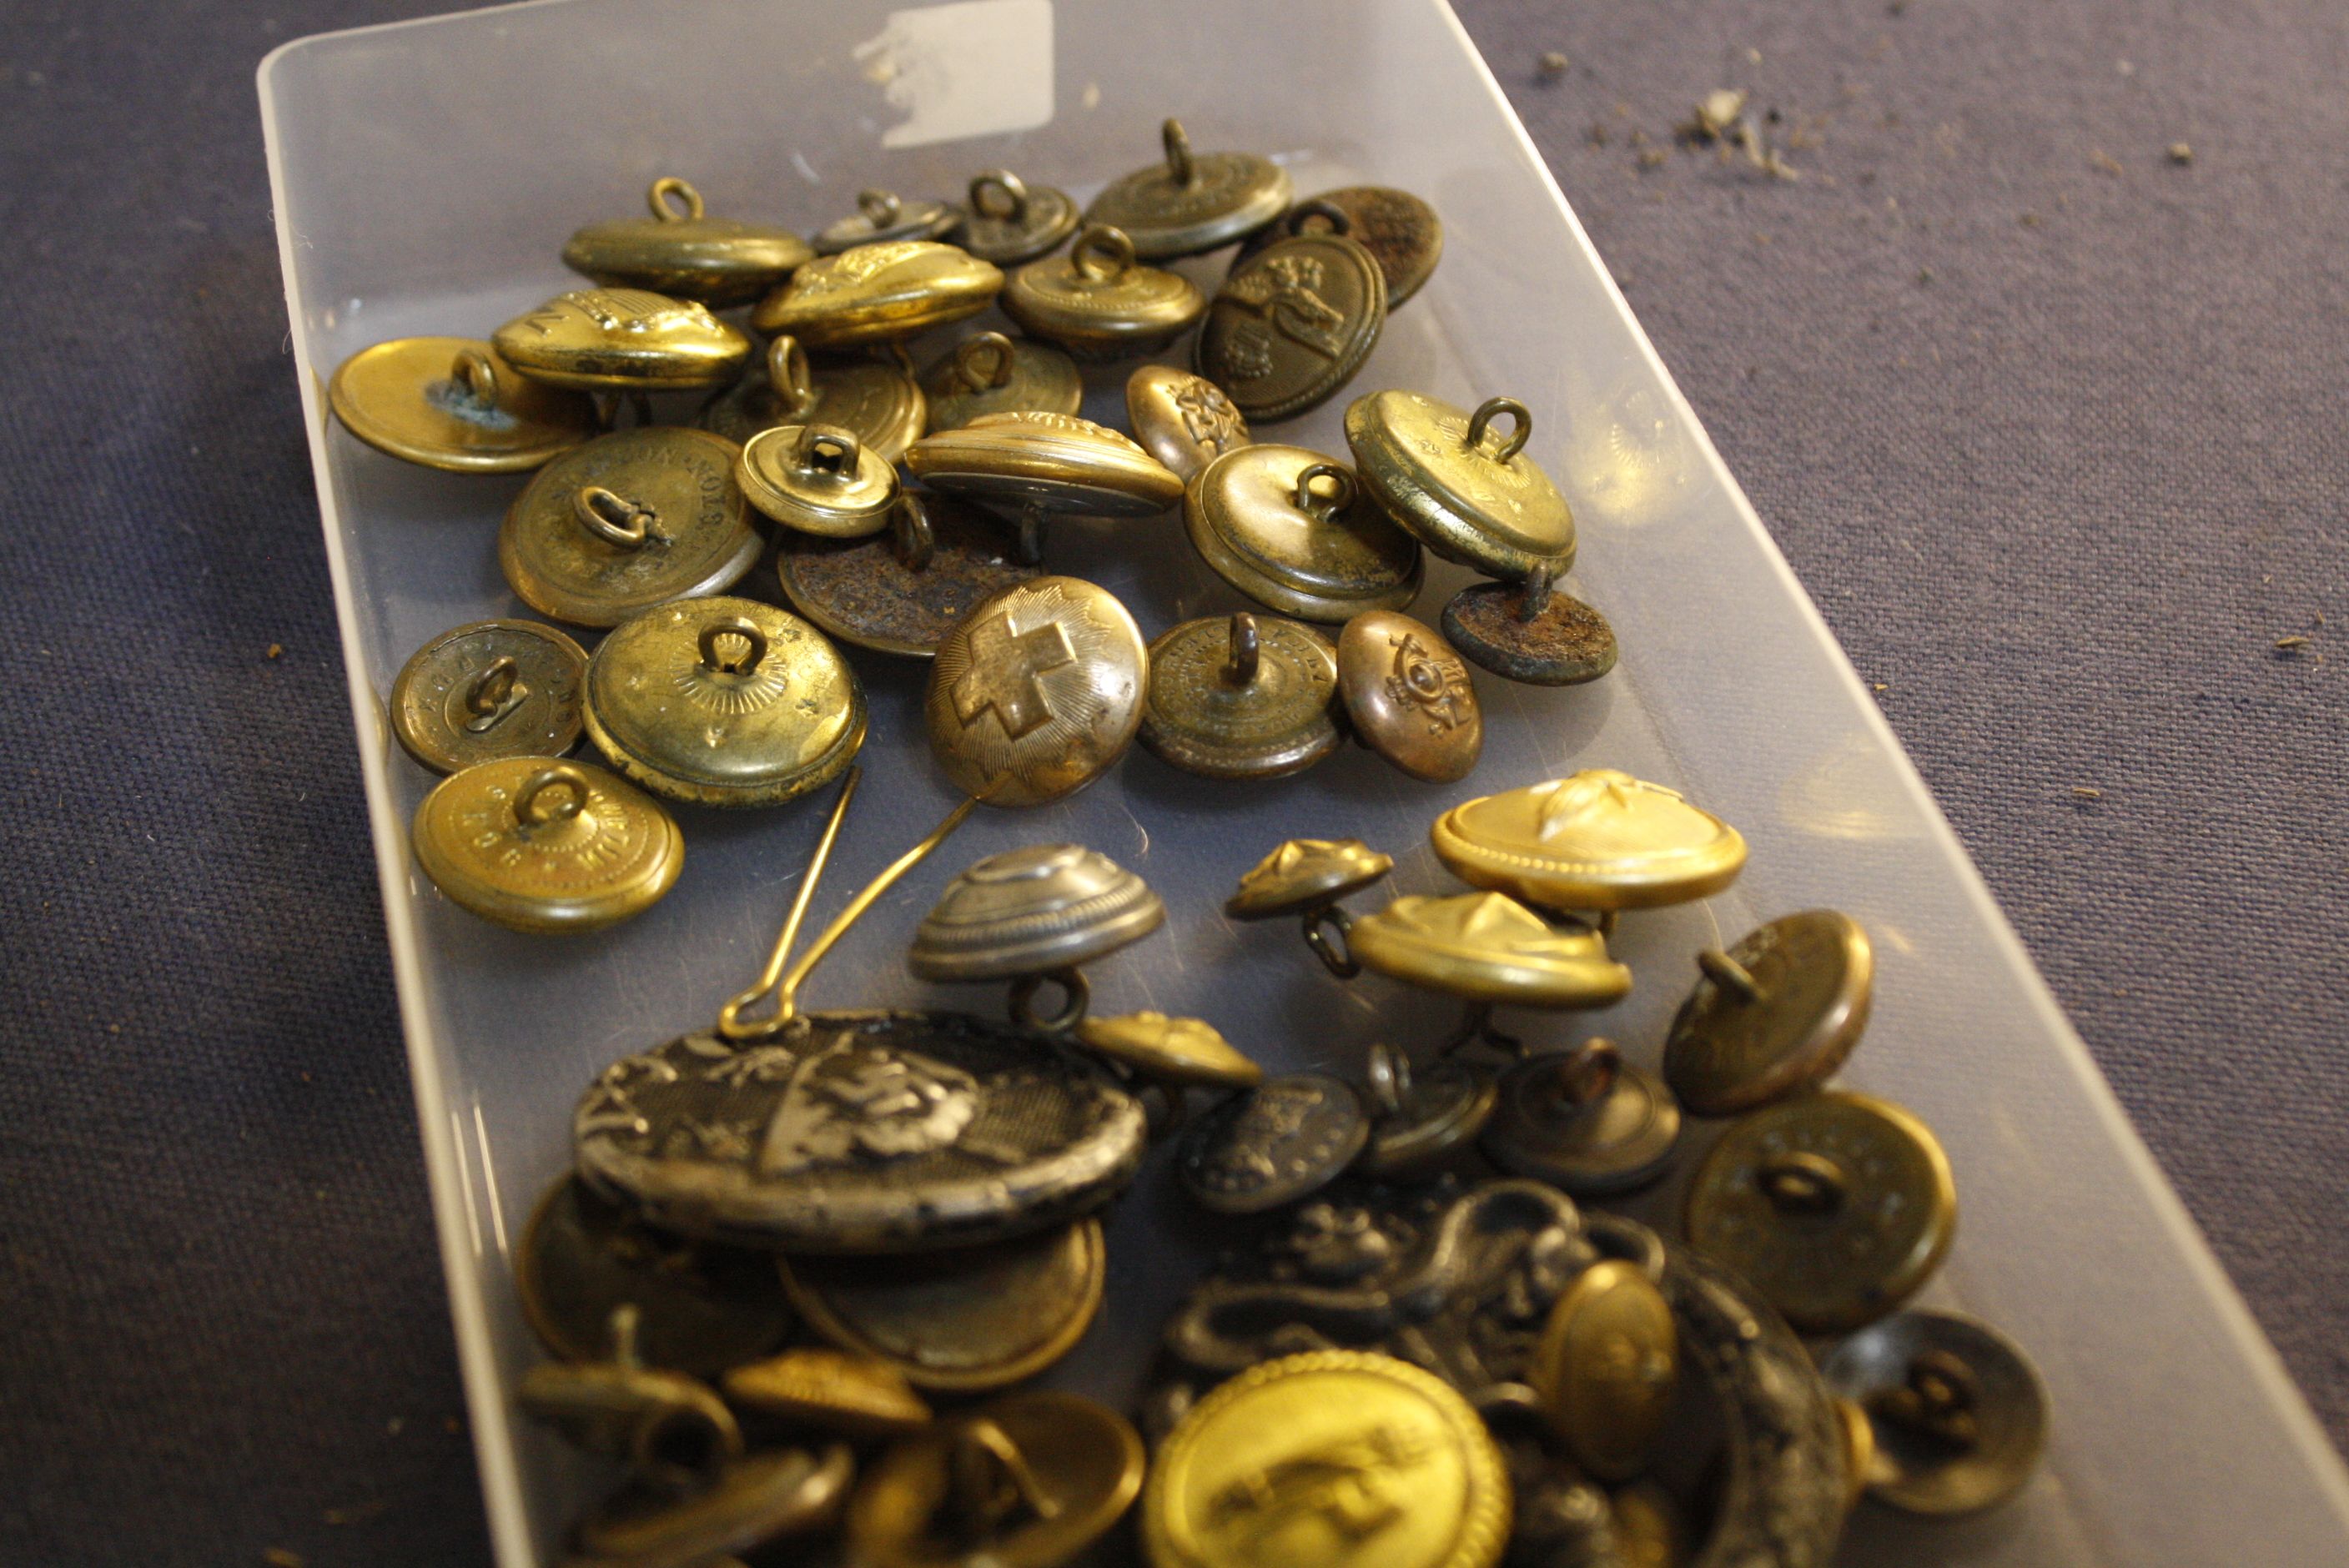 [Militaria] - A Collection of Military Buttons and Insignia, including a wound and an anti-